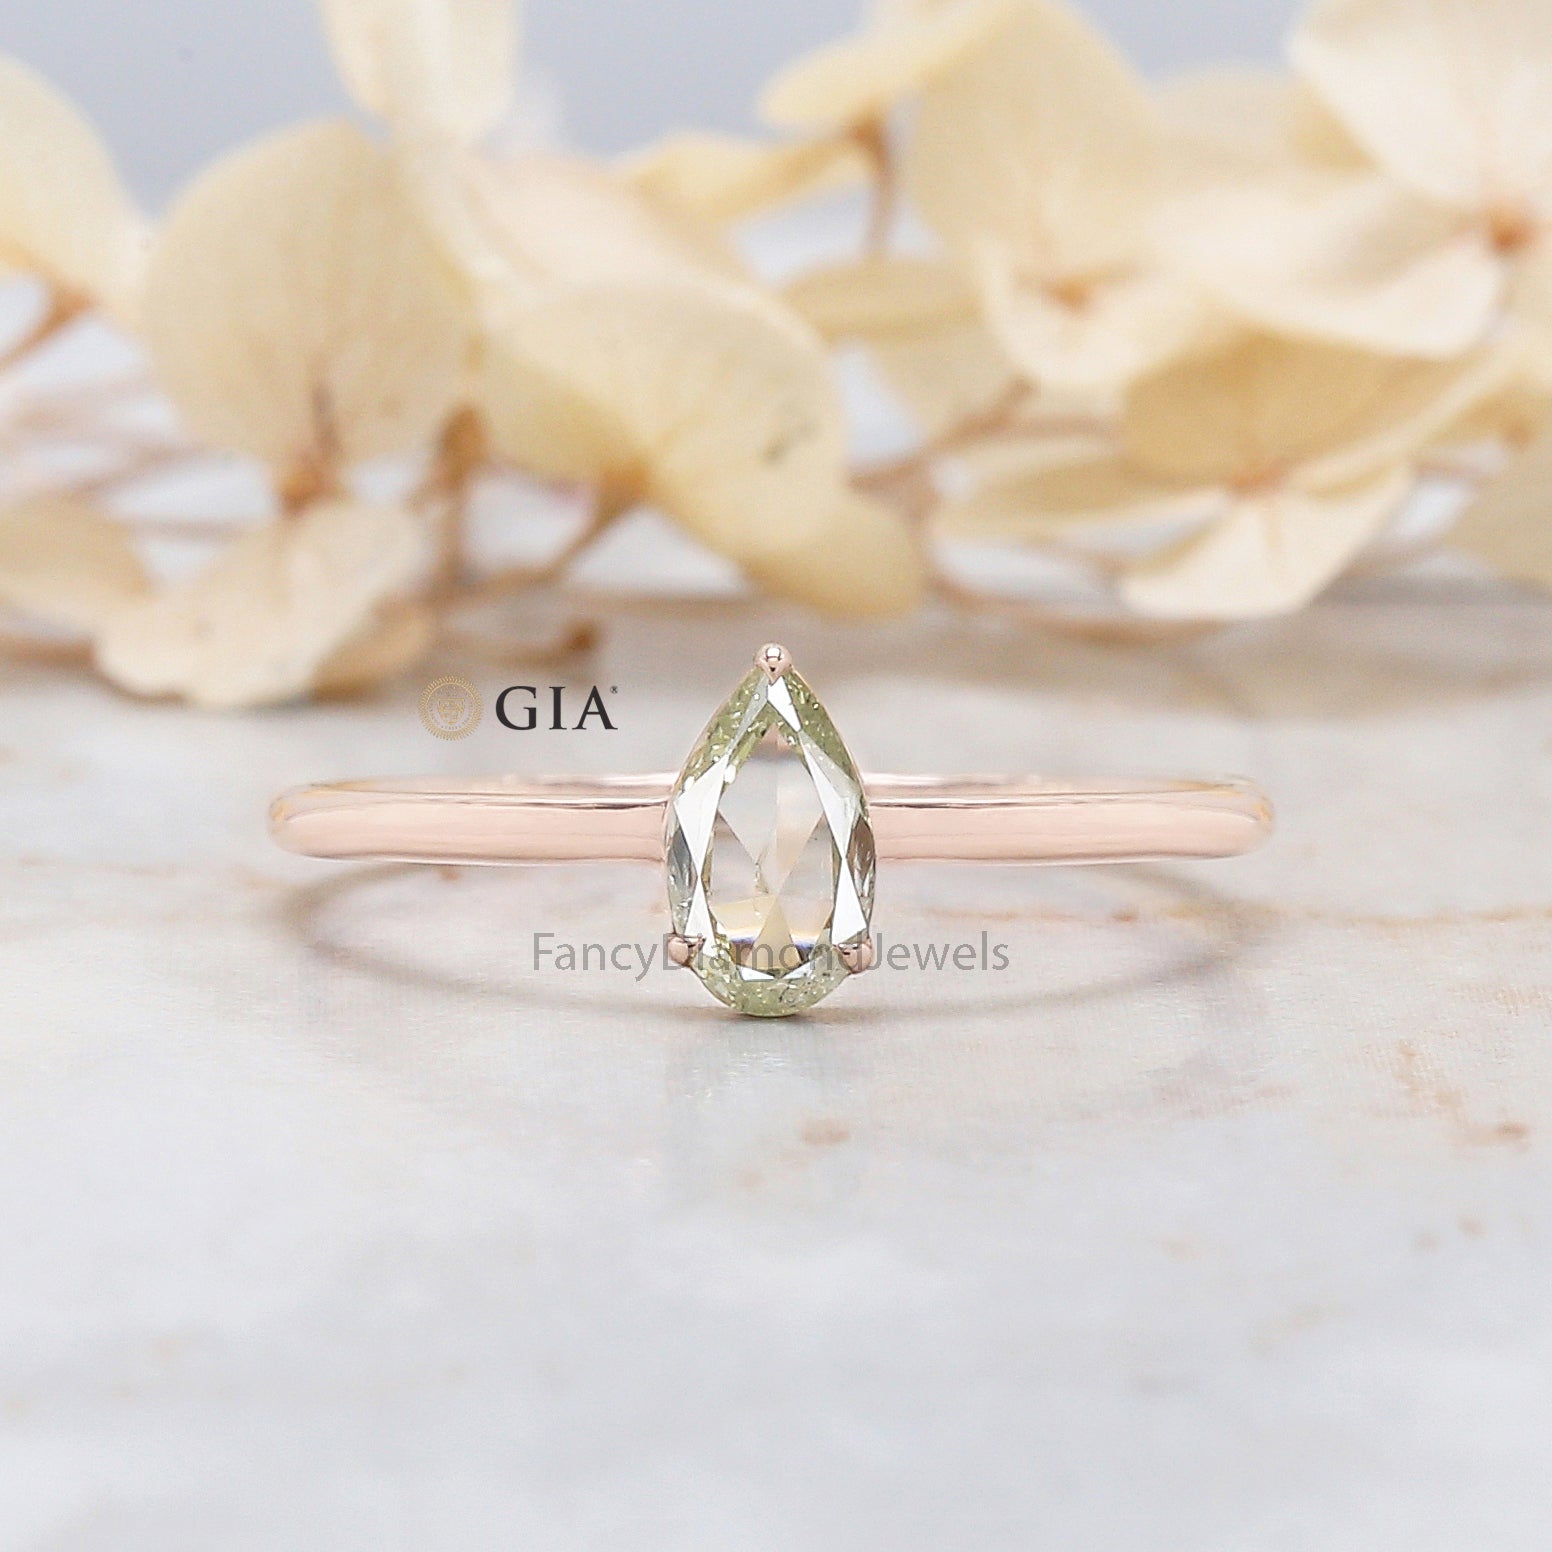 GIA Certified Pear Green Color Diamond Ring, Green Pear Diamond Engagement Ring, Pear Shape Ring, Diamond Ring, Pear Cut Ring, KDL4429